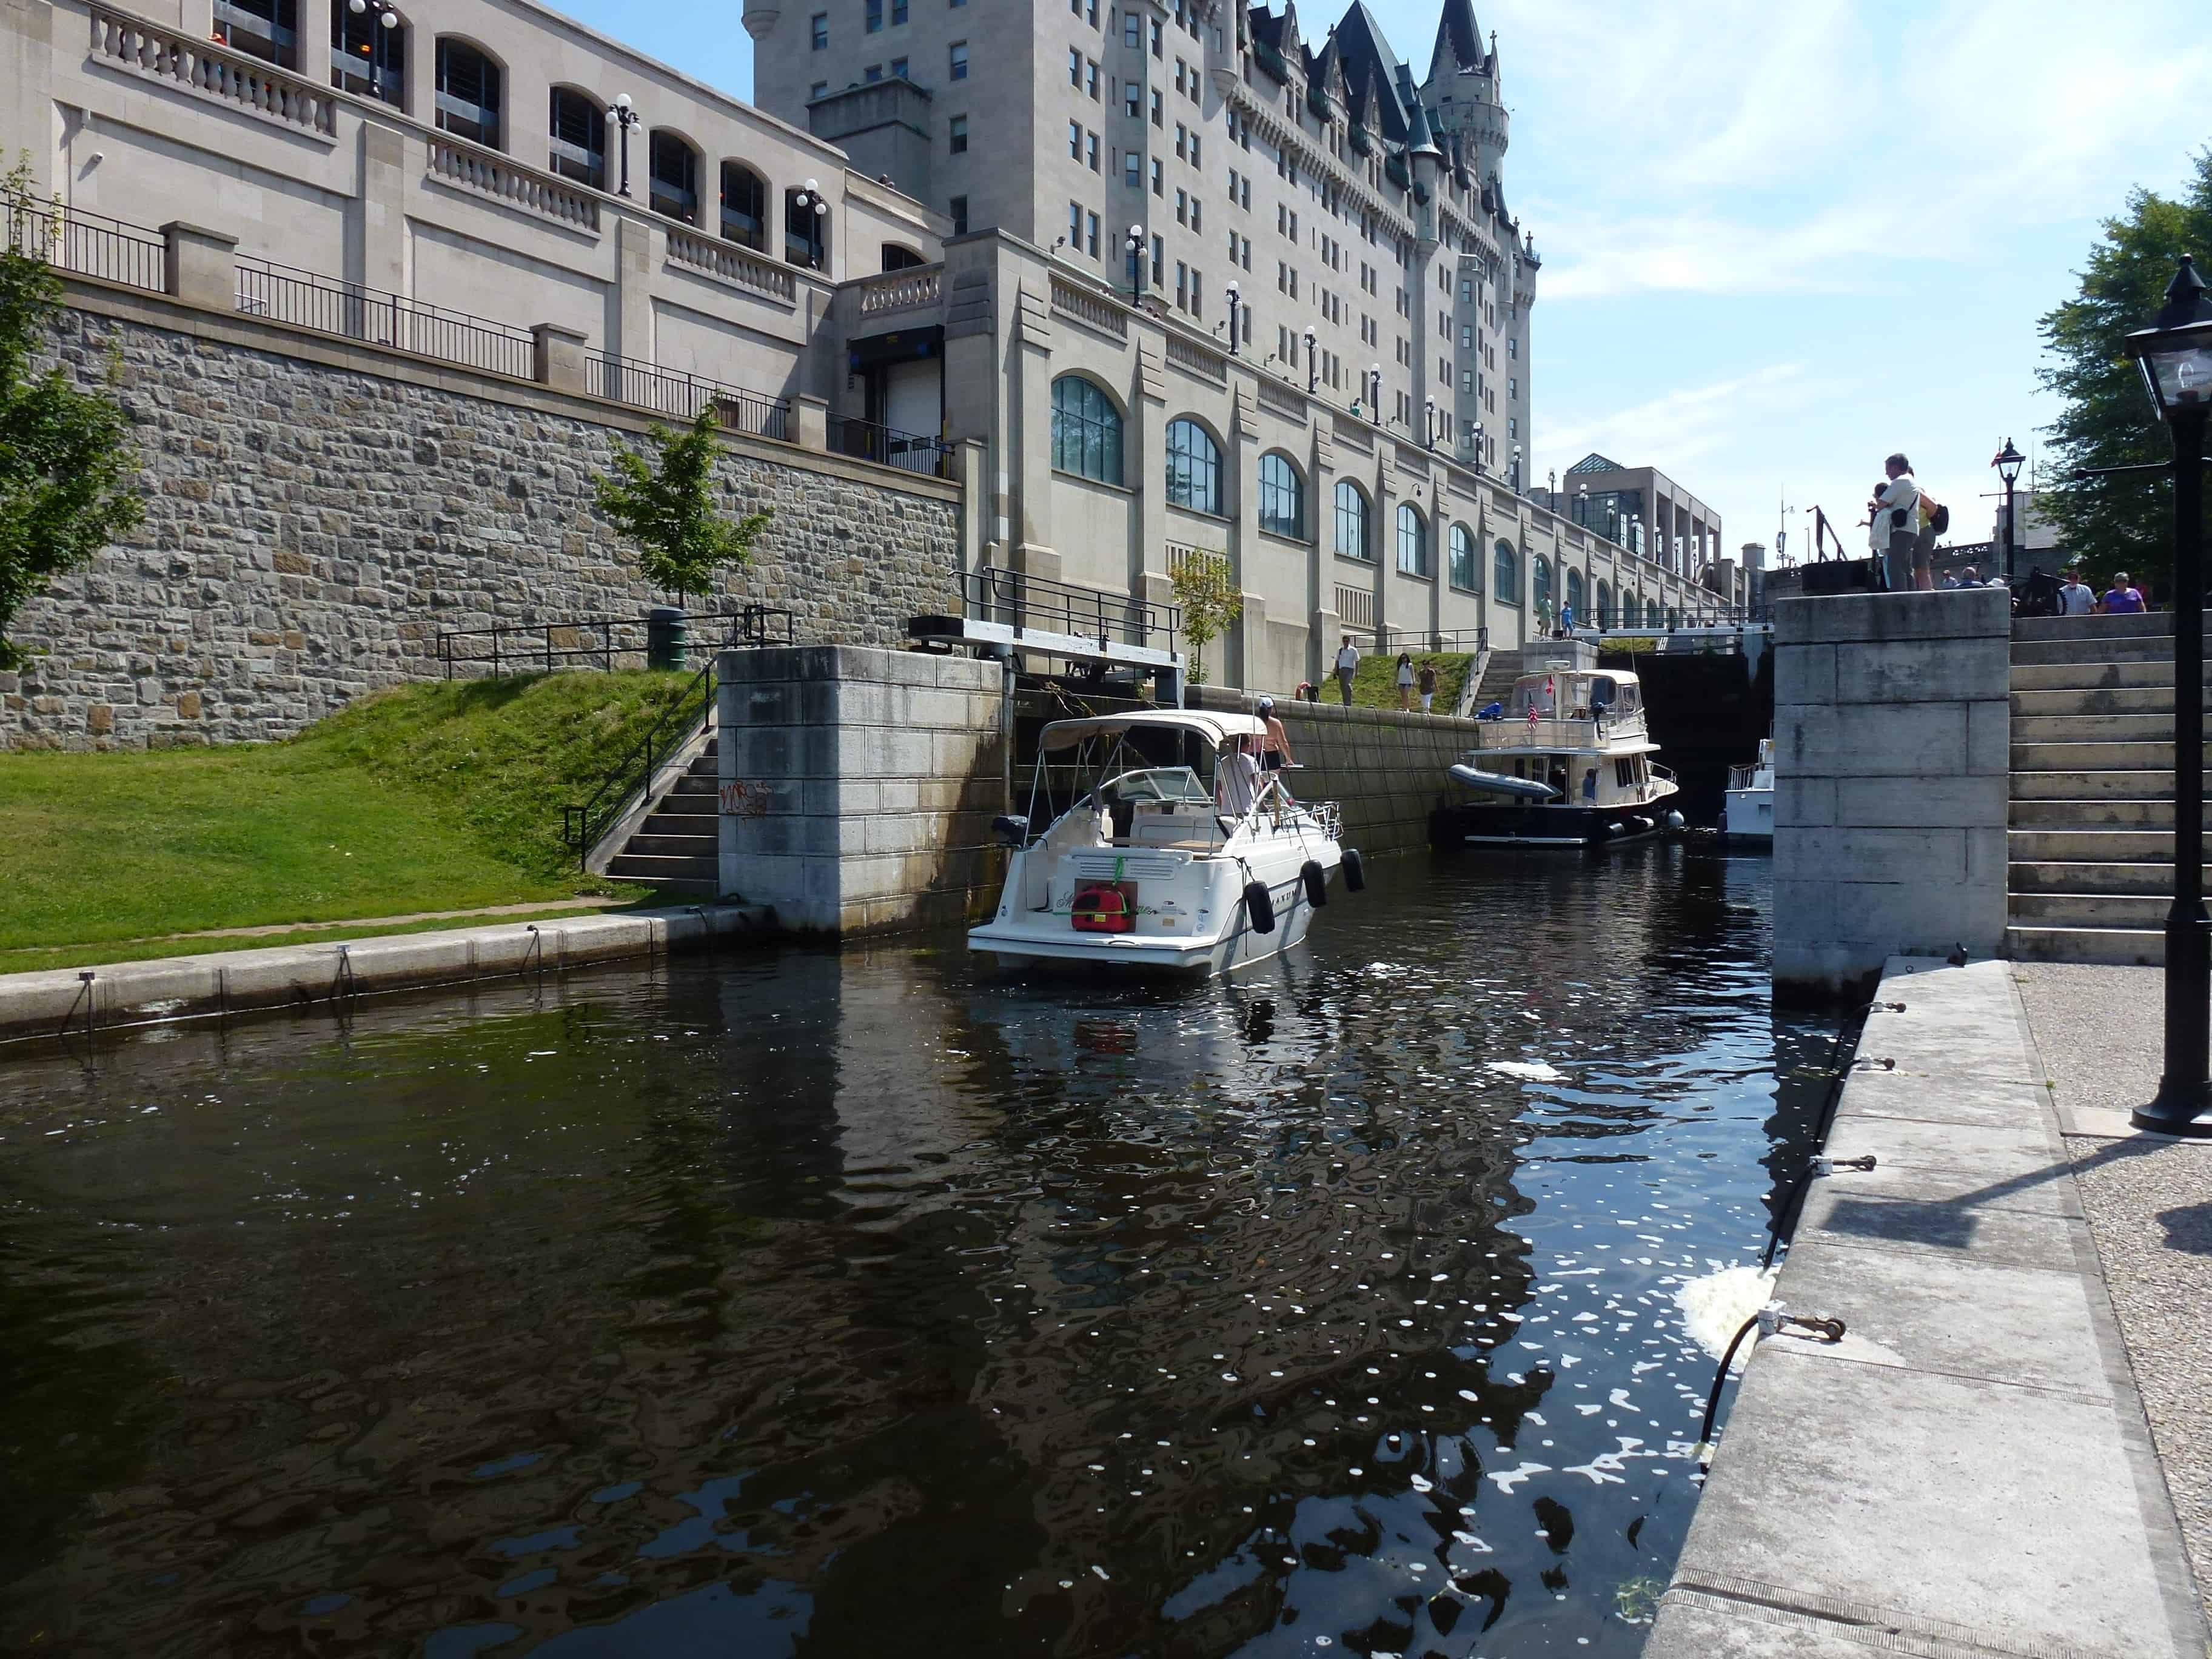 Boats passing through the locks on the Rideau Canal in Ottawa, Ontario, Canada